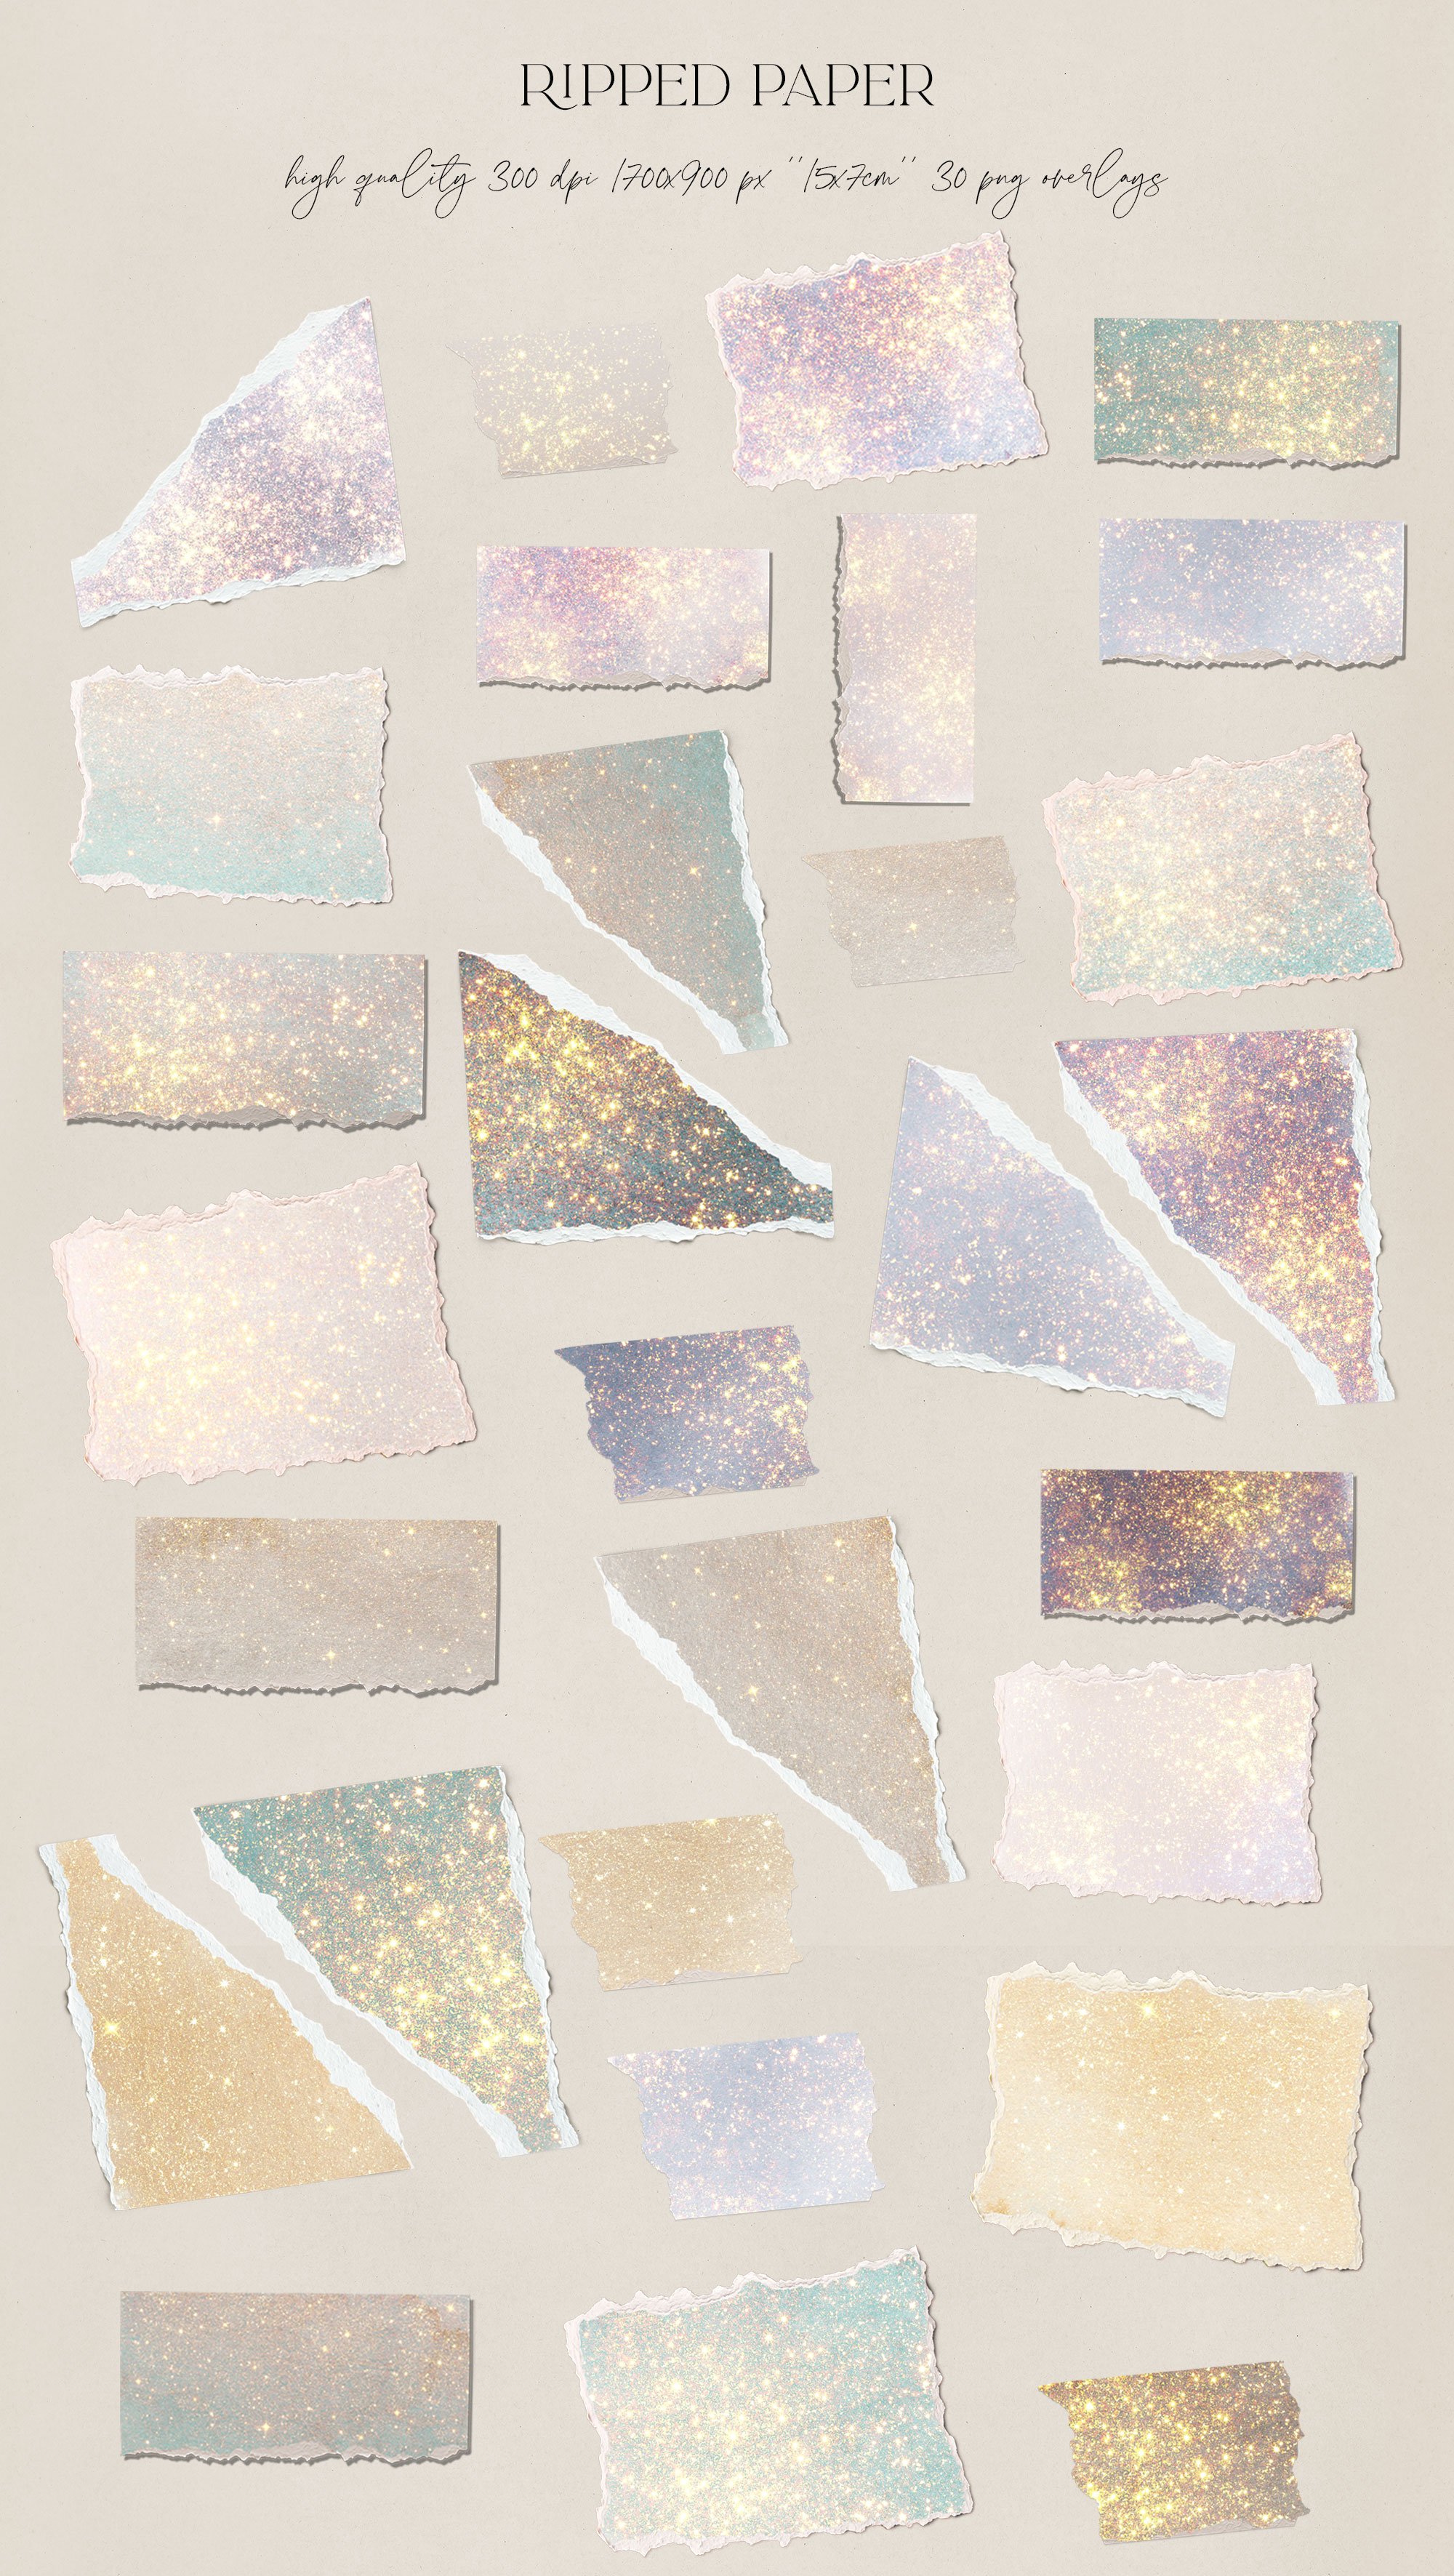 Shimmer Textures & Ripped Paper Collage Design